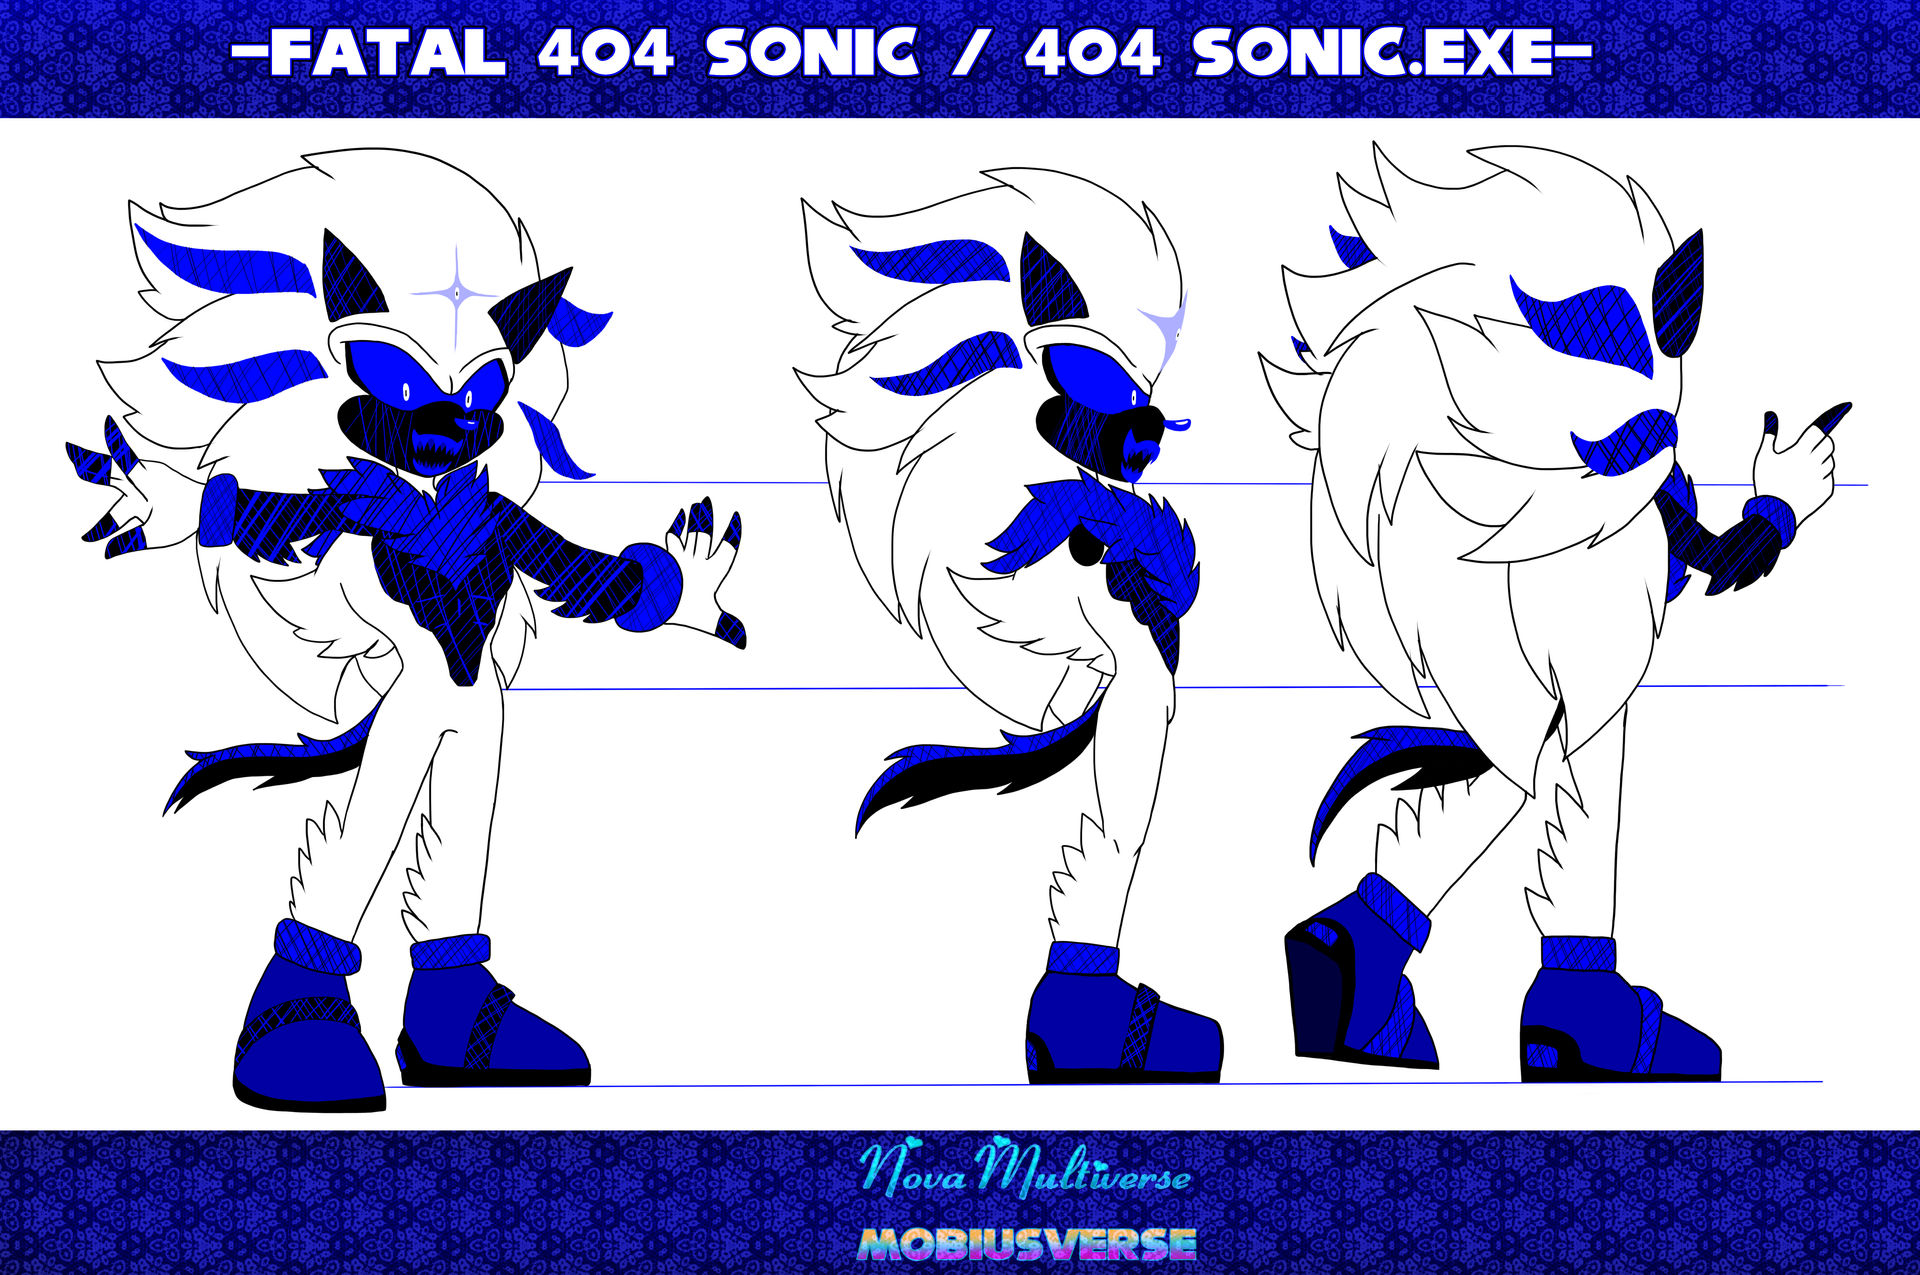 Primal.exe AKA DarkSpine Sonic.exe Reference Sheet by NovaEXEVerse